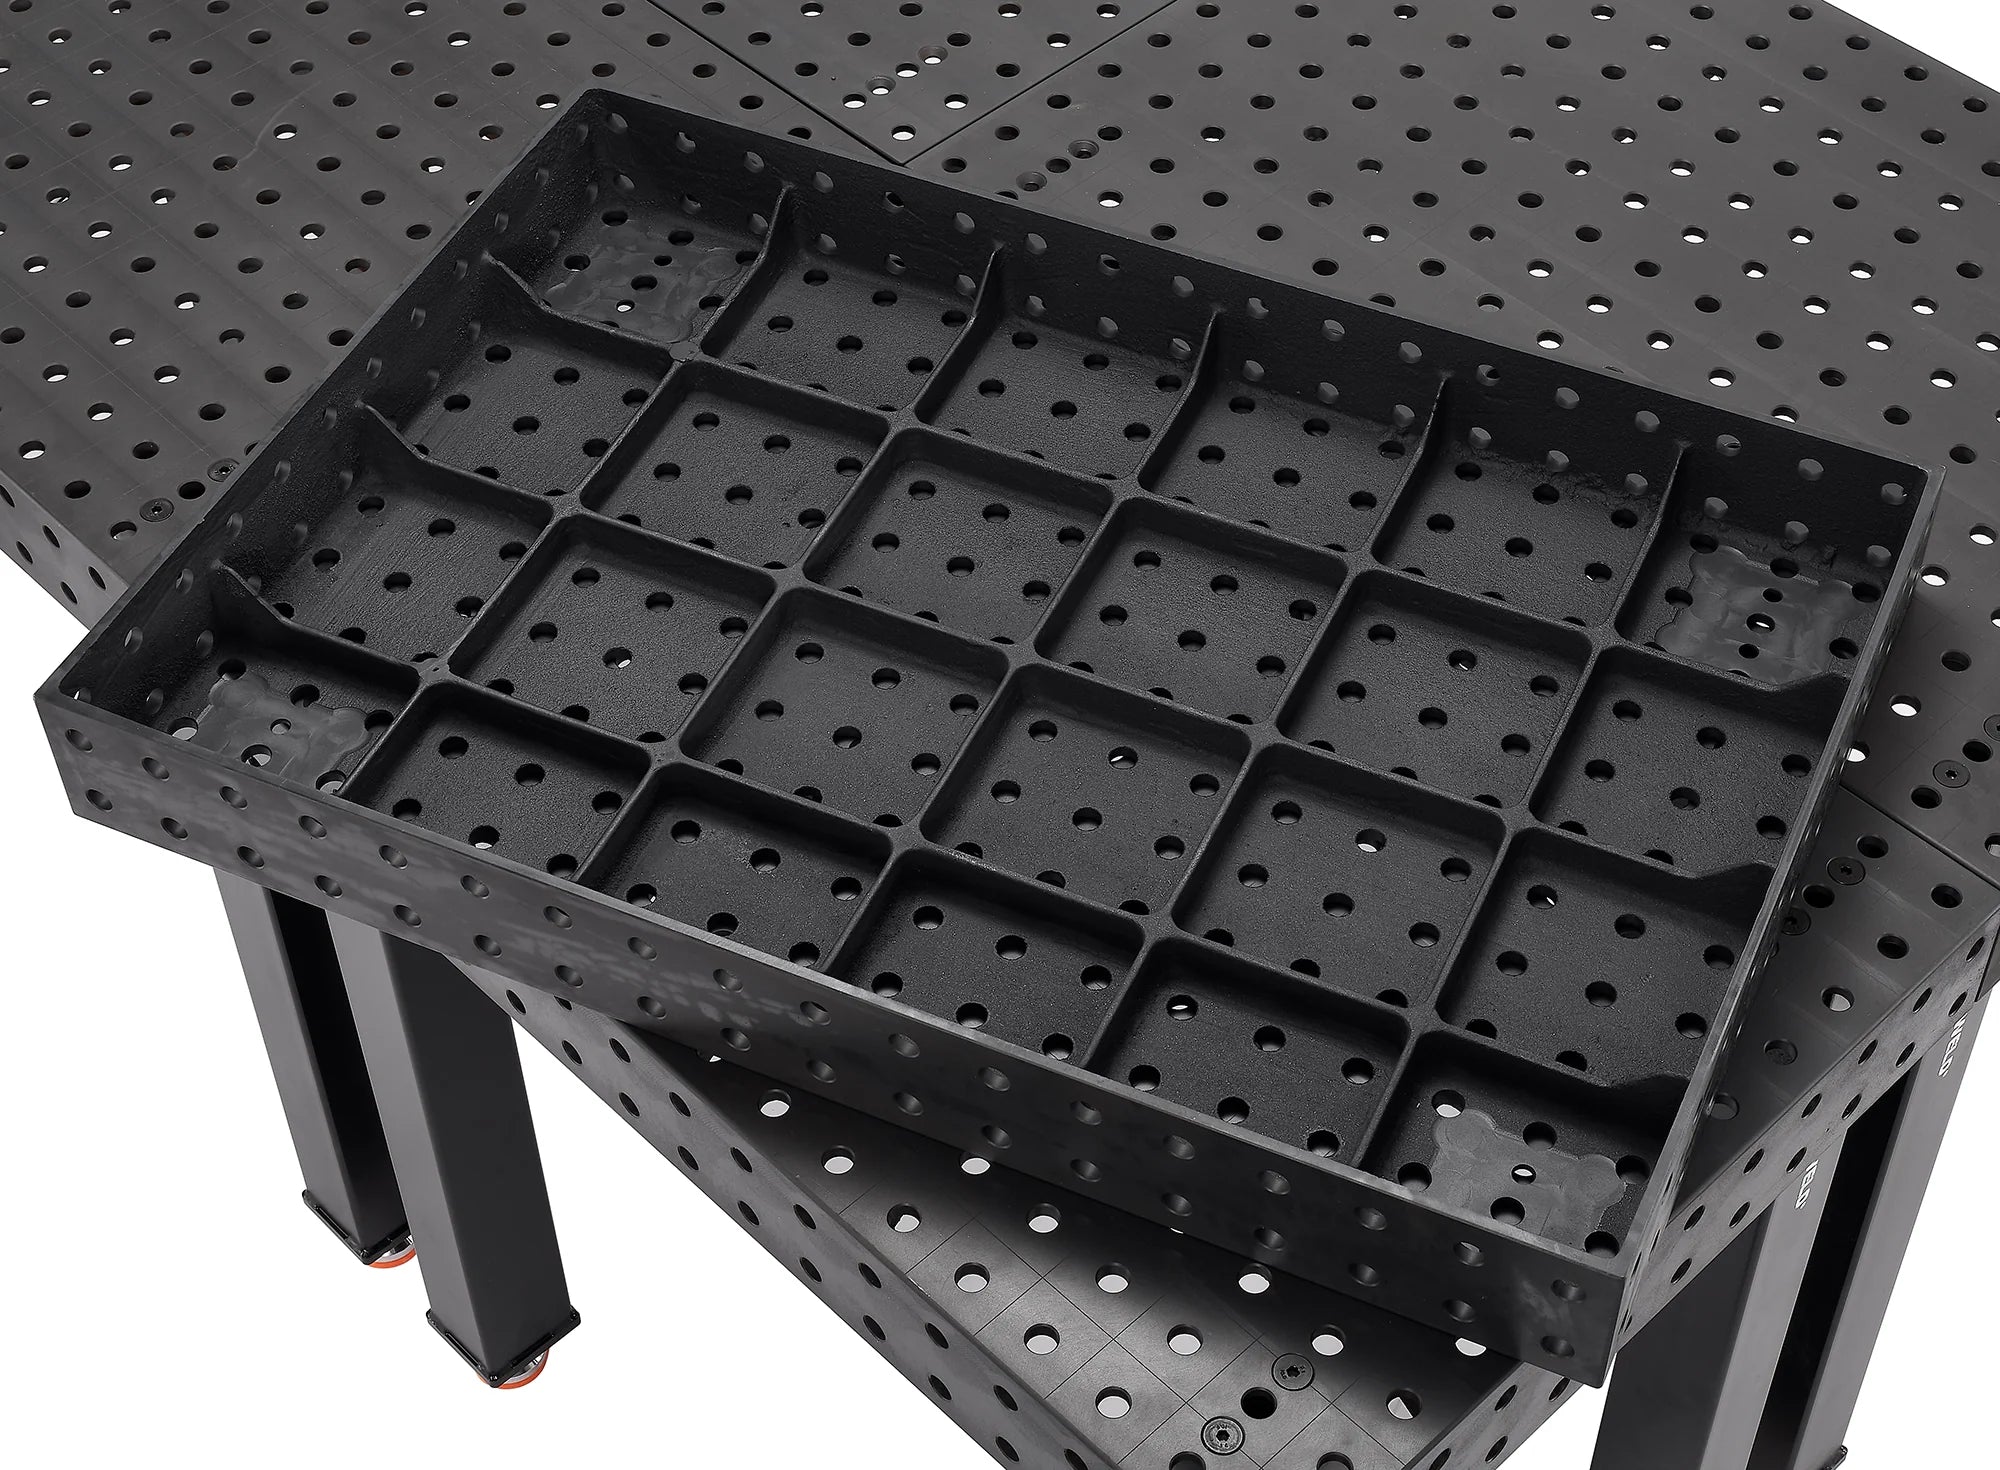 PrimeWeld Fixture Table 2 x 3 Cast Iron With Nitrate Coating and Legs